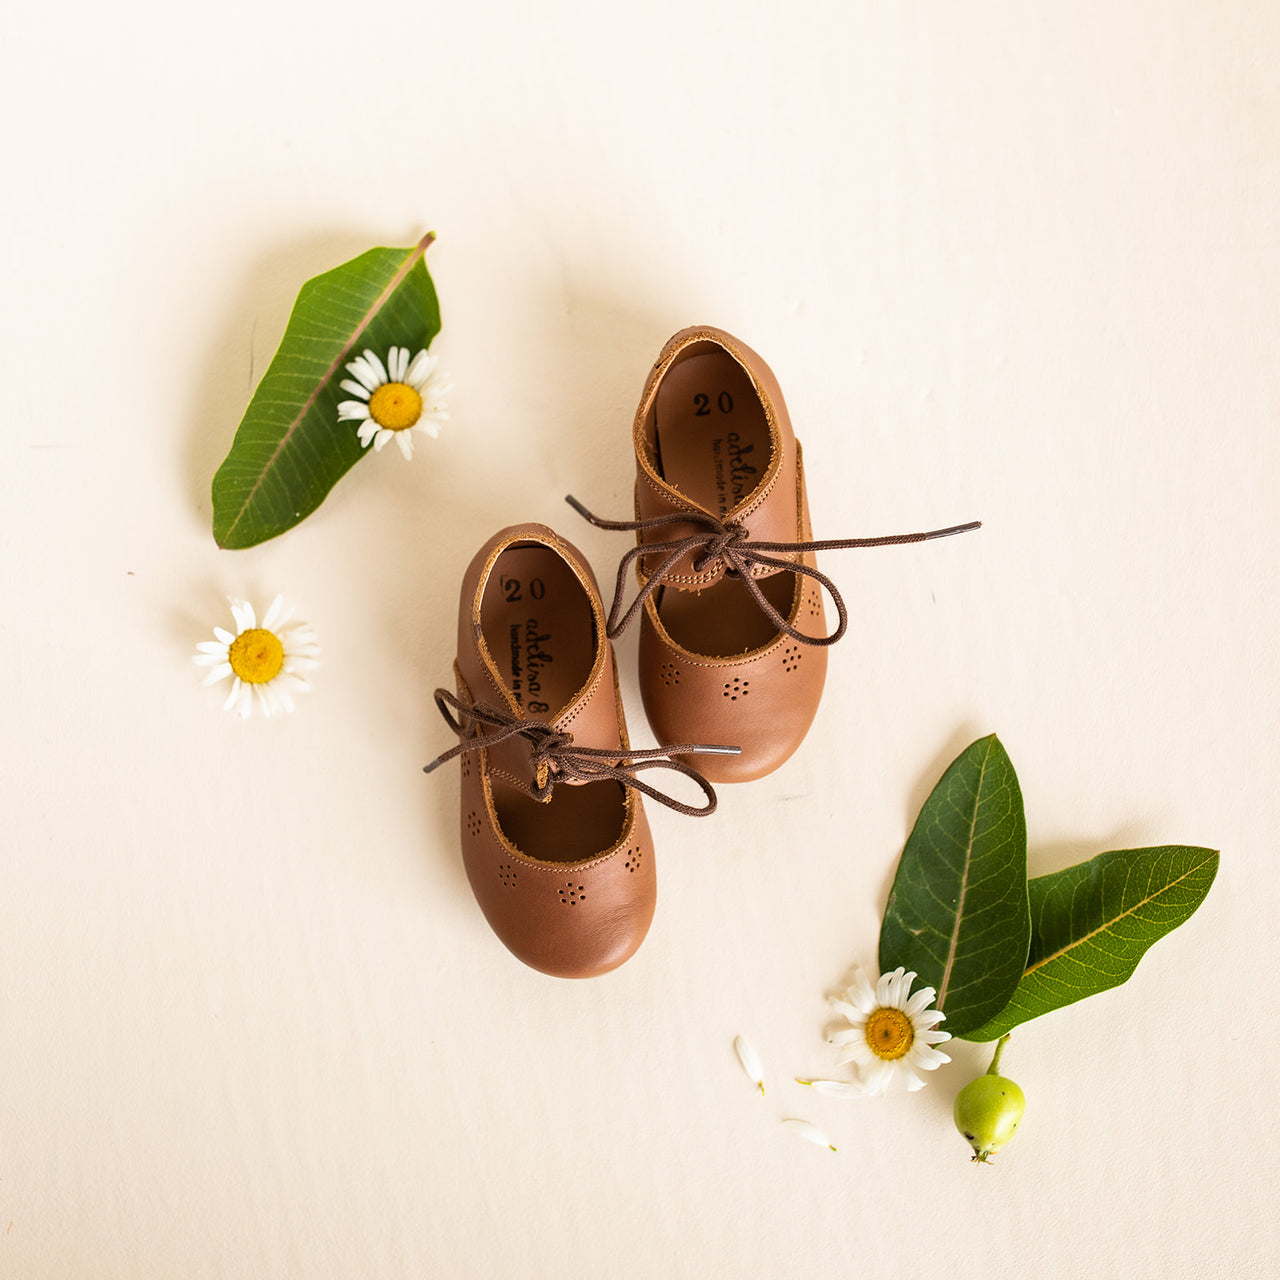 Adelisa & Co Sol Oxford style Mary Janes with sun details  in medium brown leather. These vintage style Mary Jane leather shoes for girls feature a subtle design that pairs well with any outfit.